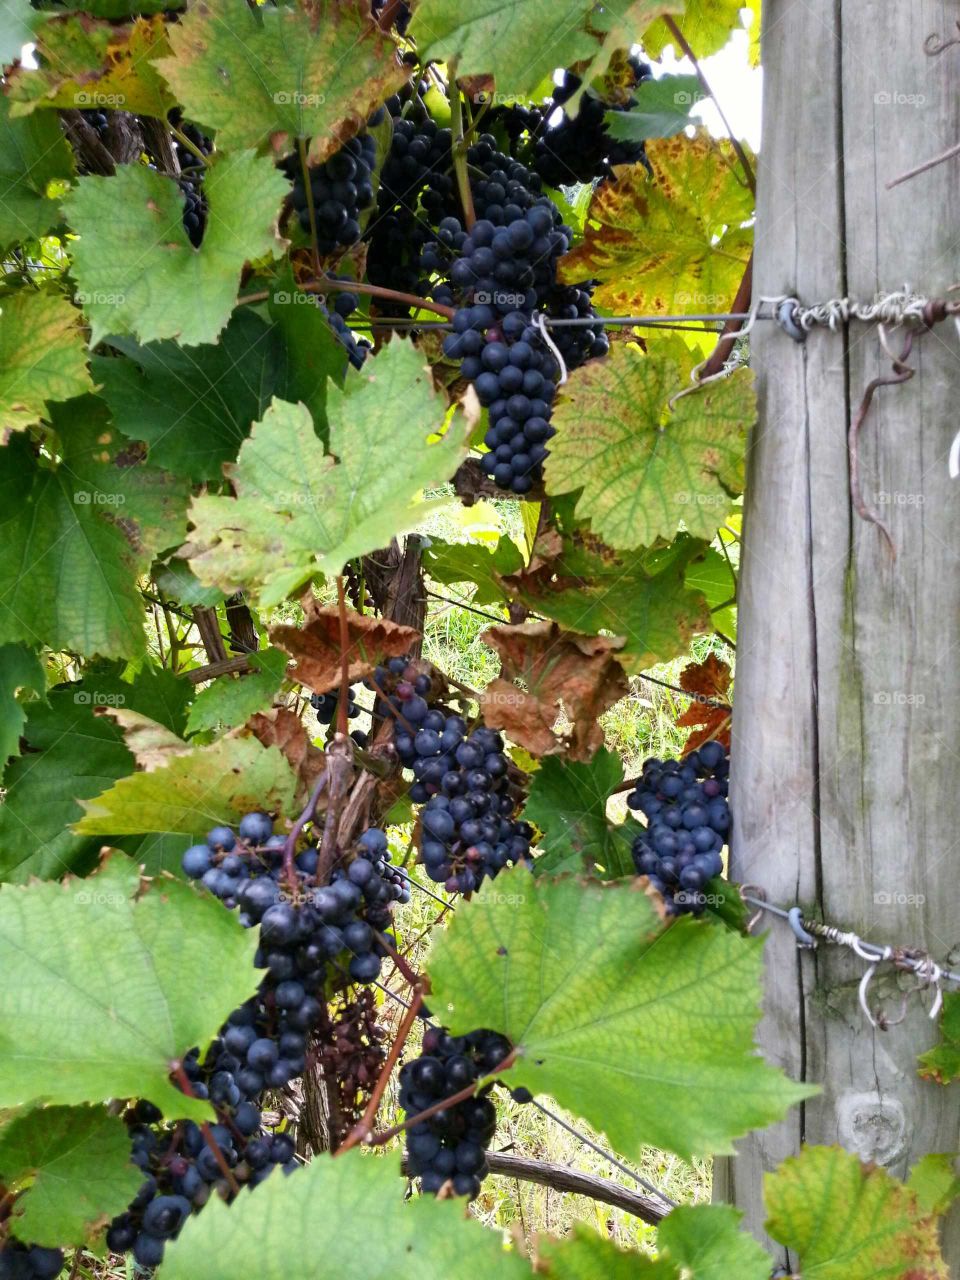 Juicy grapes ripening on the vine at a vinyard.